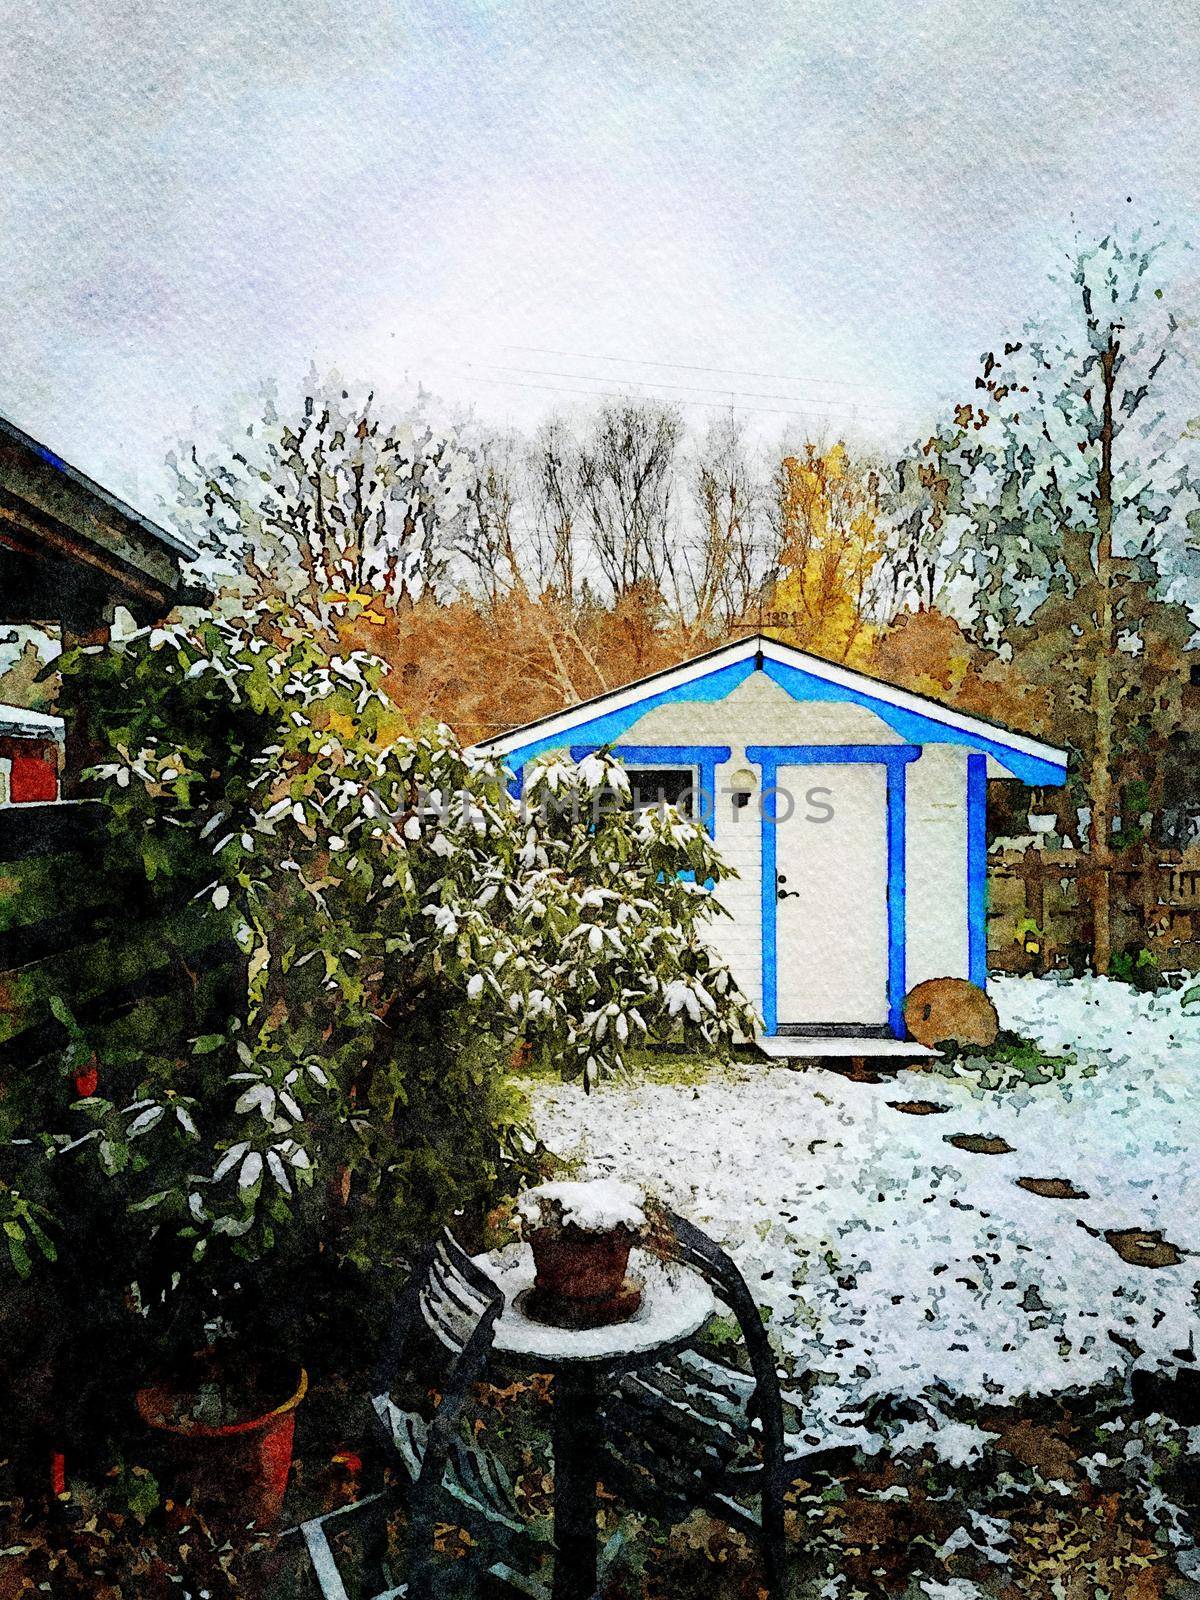 Digital watercolor painting style of a small blue and white wooden hut after a snowfall in northern Scandinavia